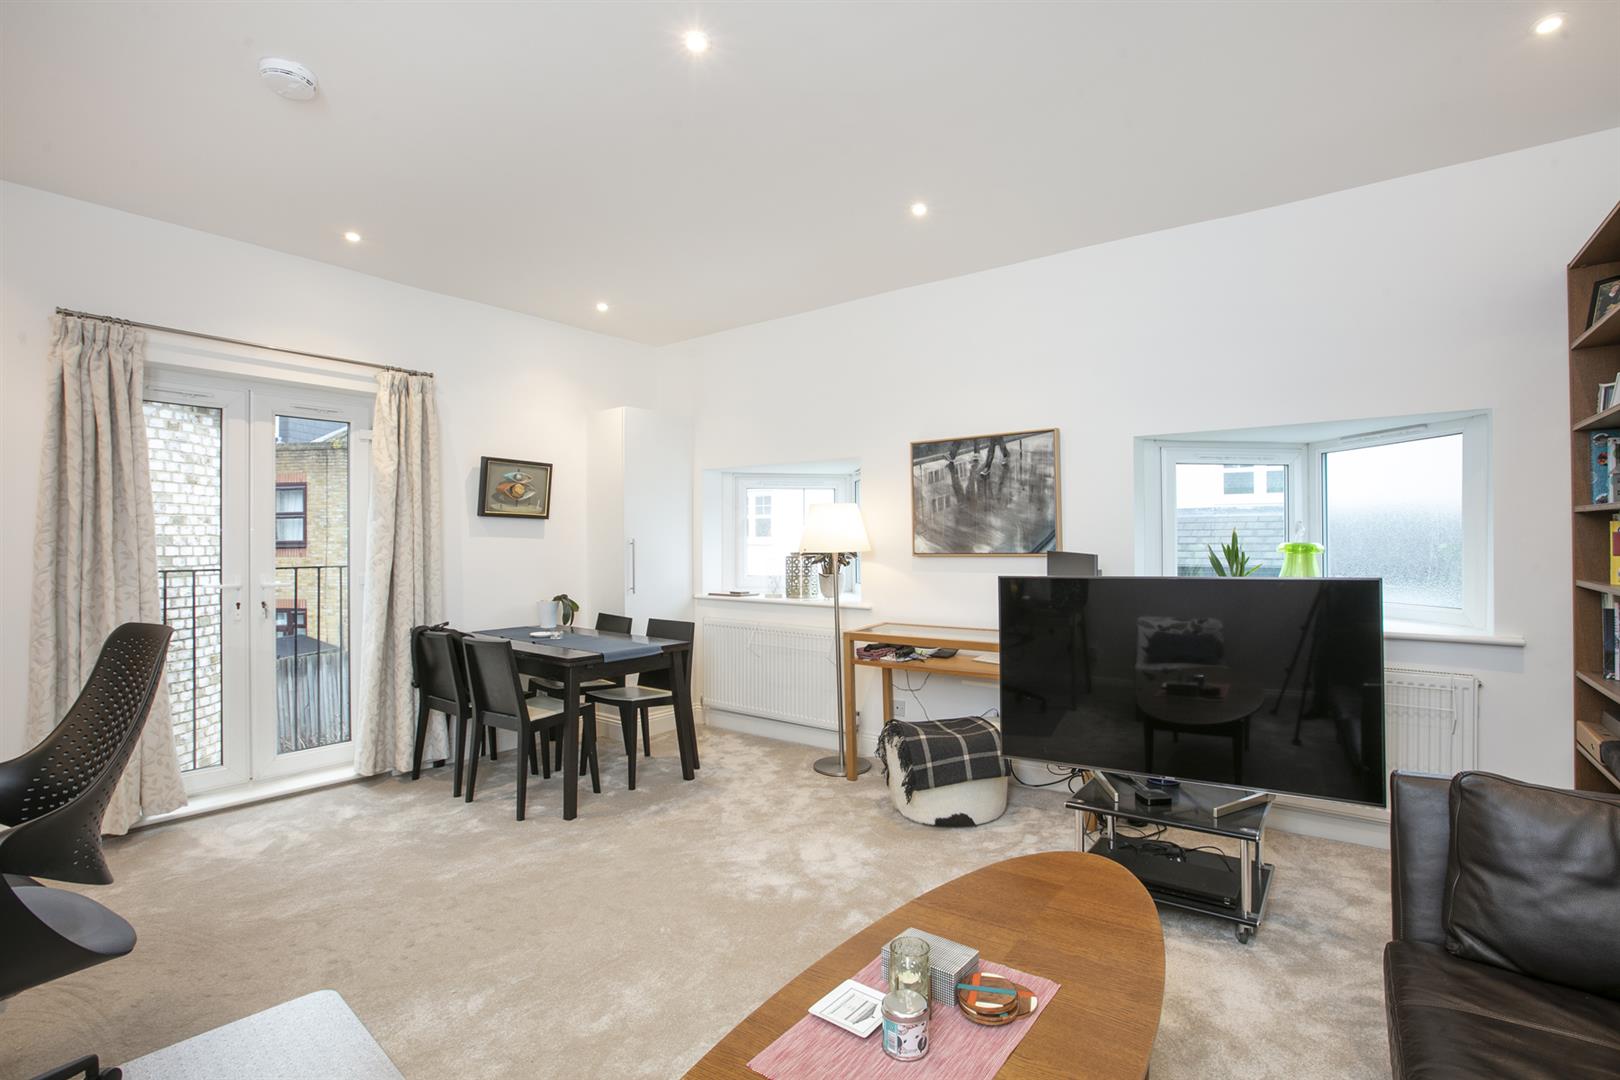 Flat/Apartment For Sale in Coleman Road, Camberwell, SE5 908 view1